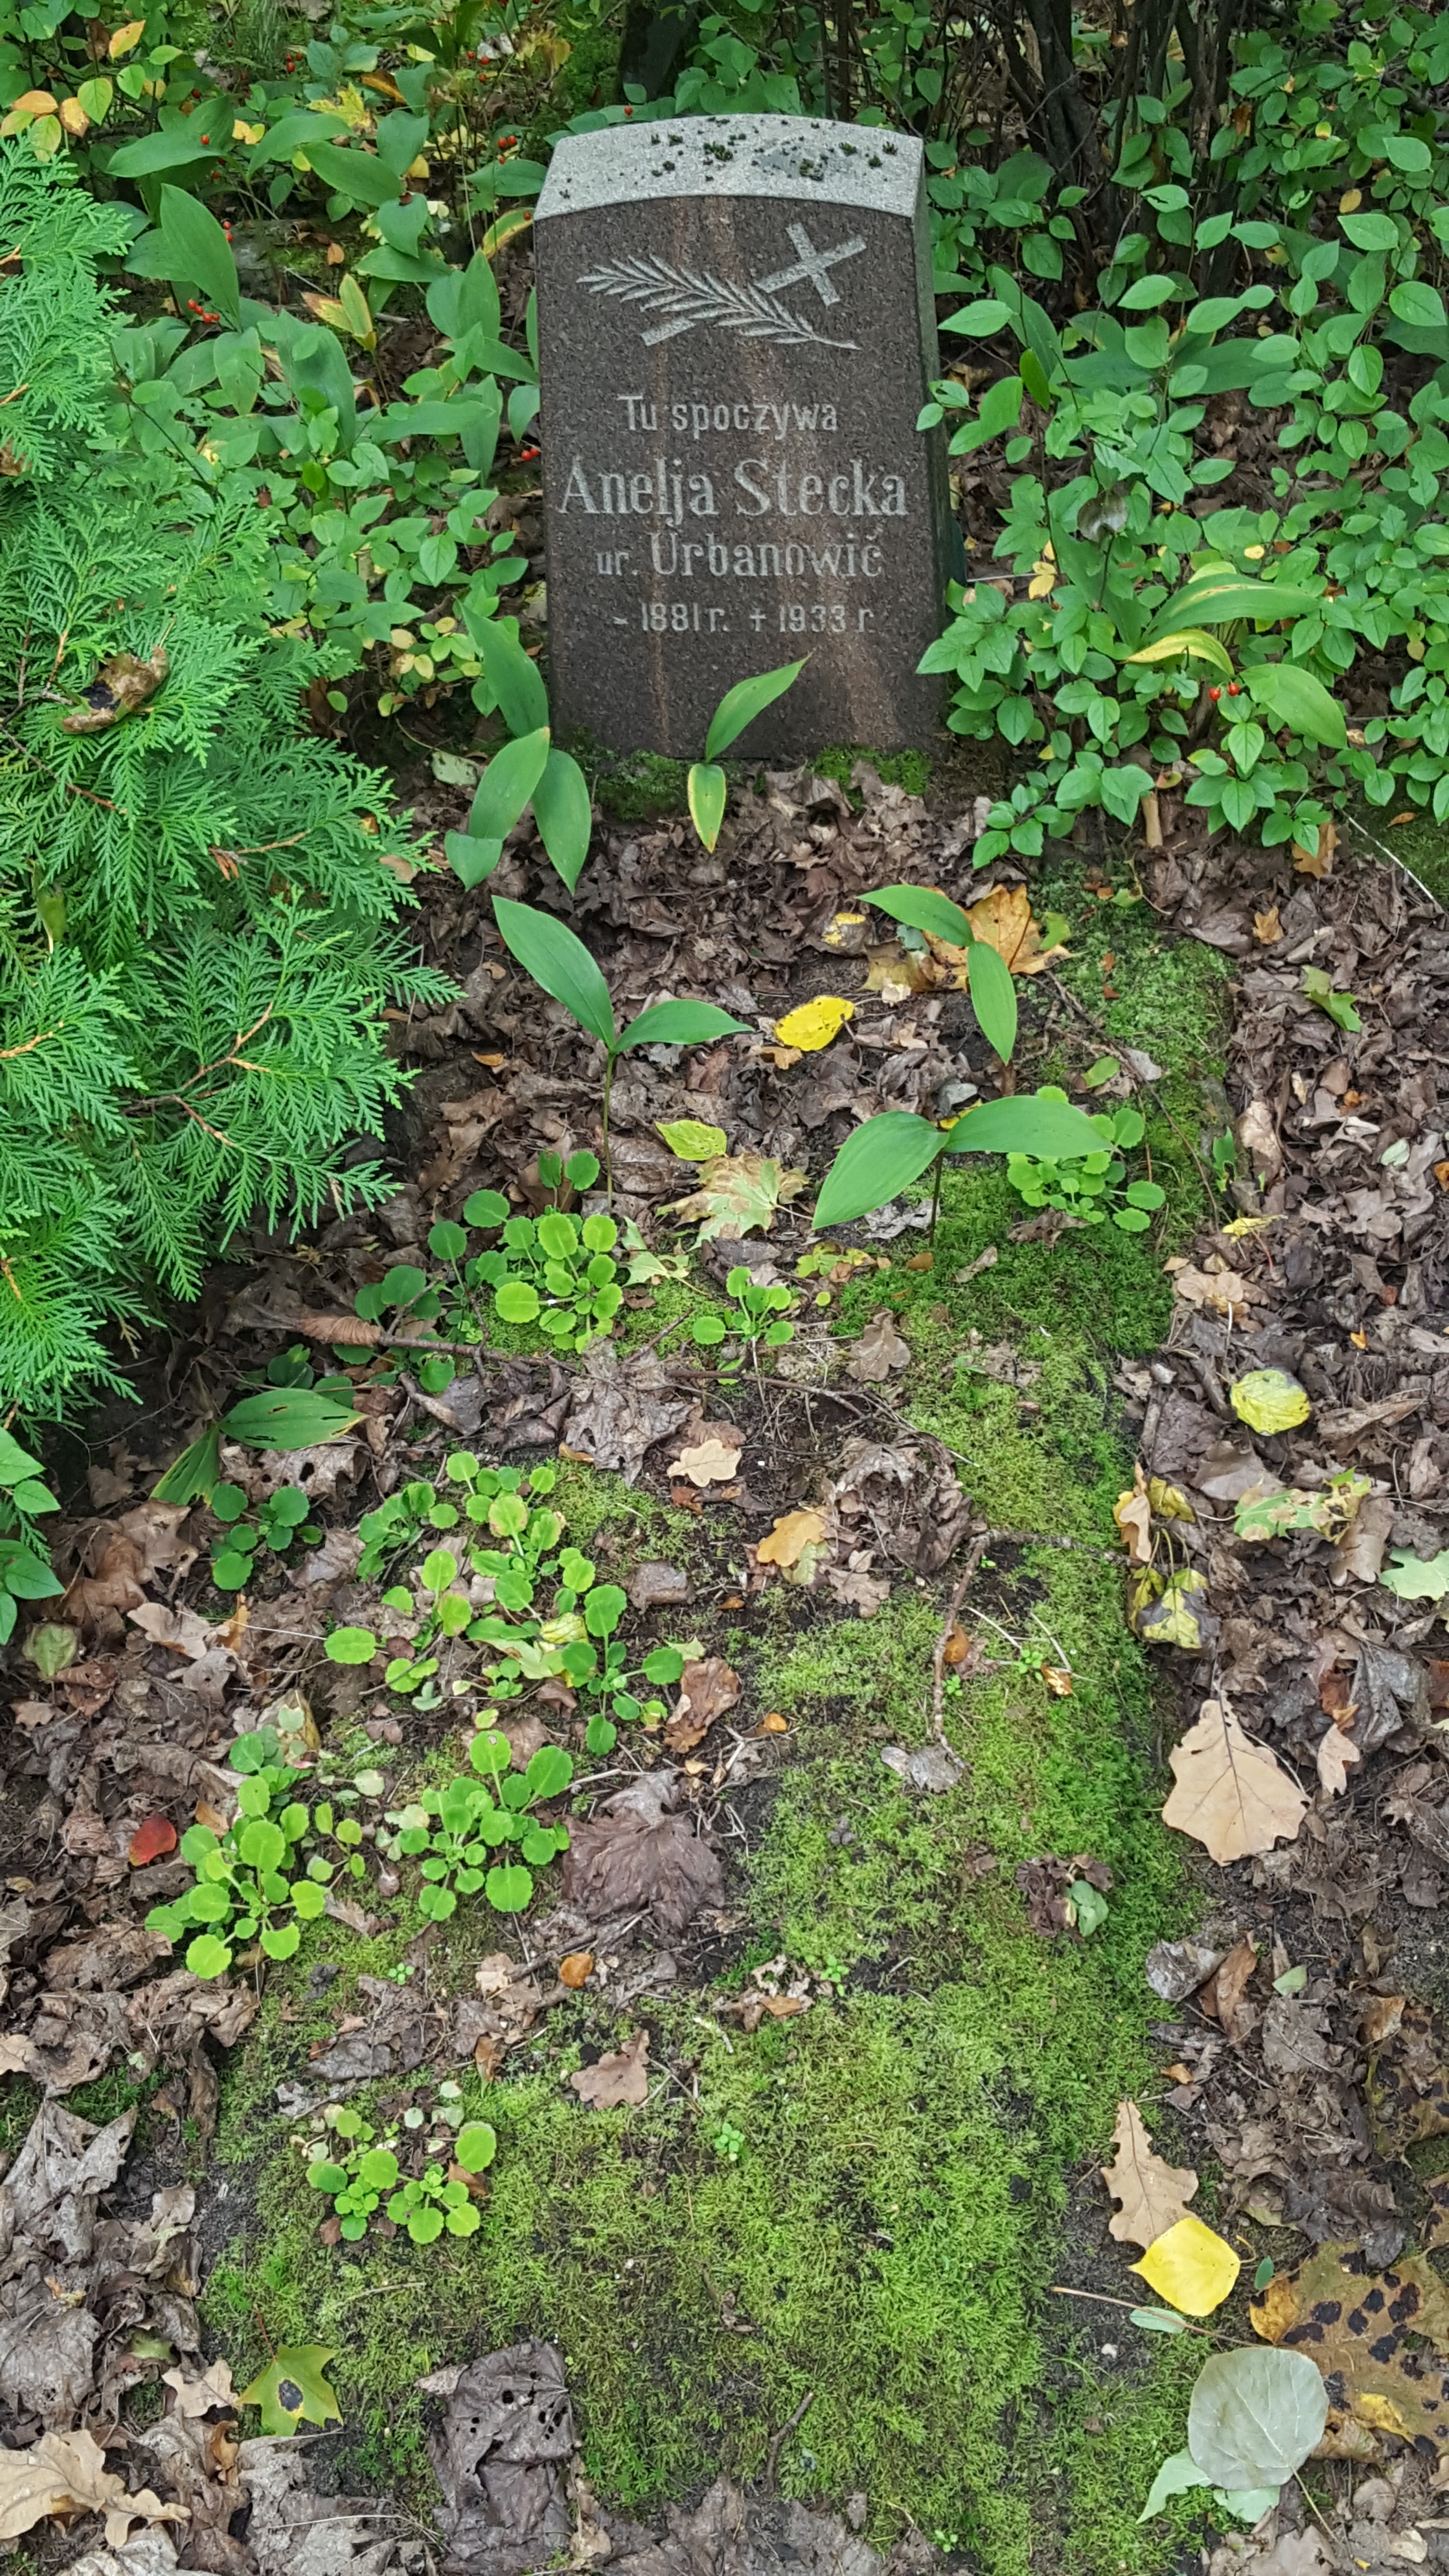 Tombstone of Anelia Stecka (Aniela Stecka), St Michael's cemetery in Riga, as of 2021.